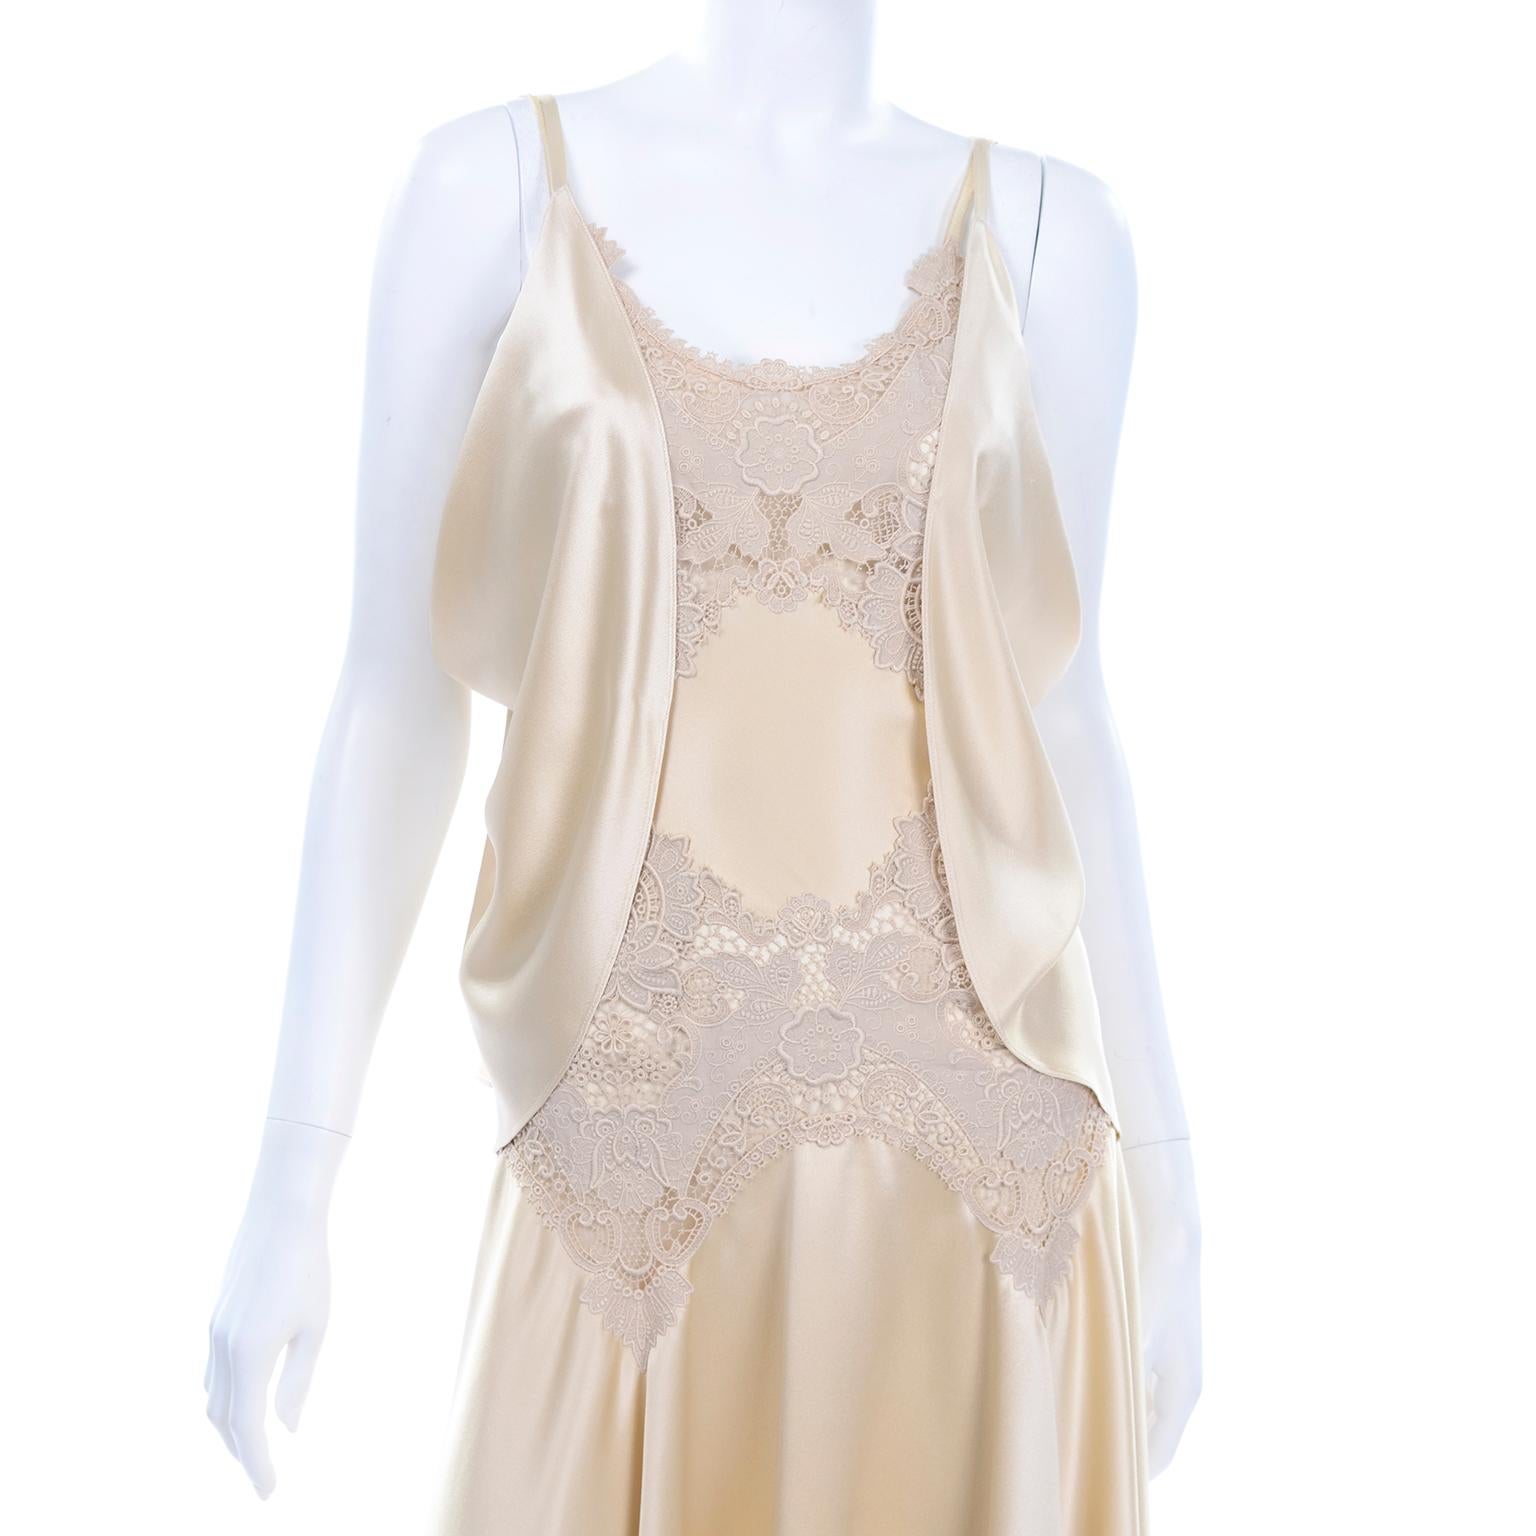 2005 Alexander McQueen Champagne Silk & Lace Slip Dress With Sleeveless Wrap Top 4